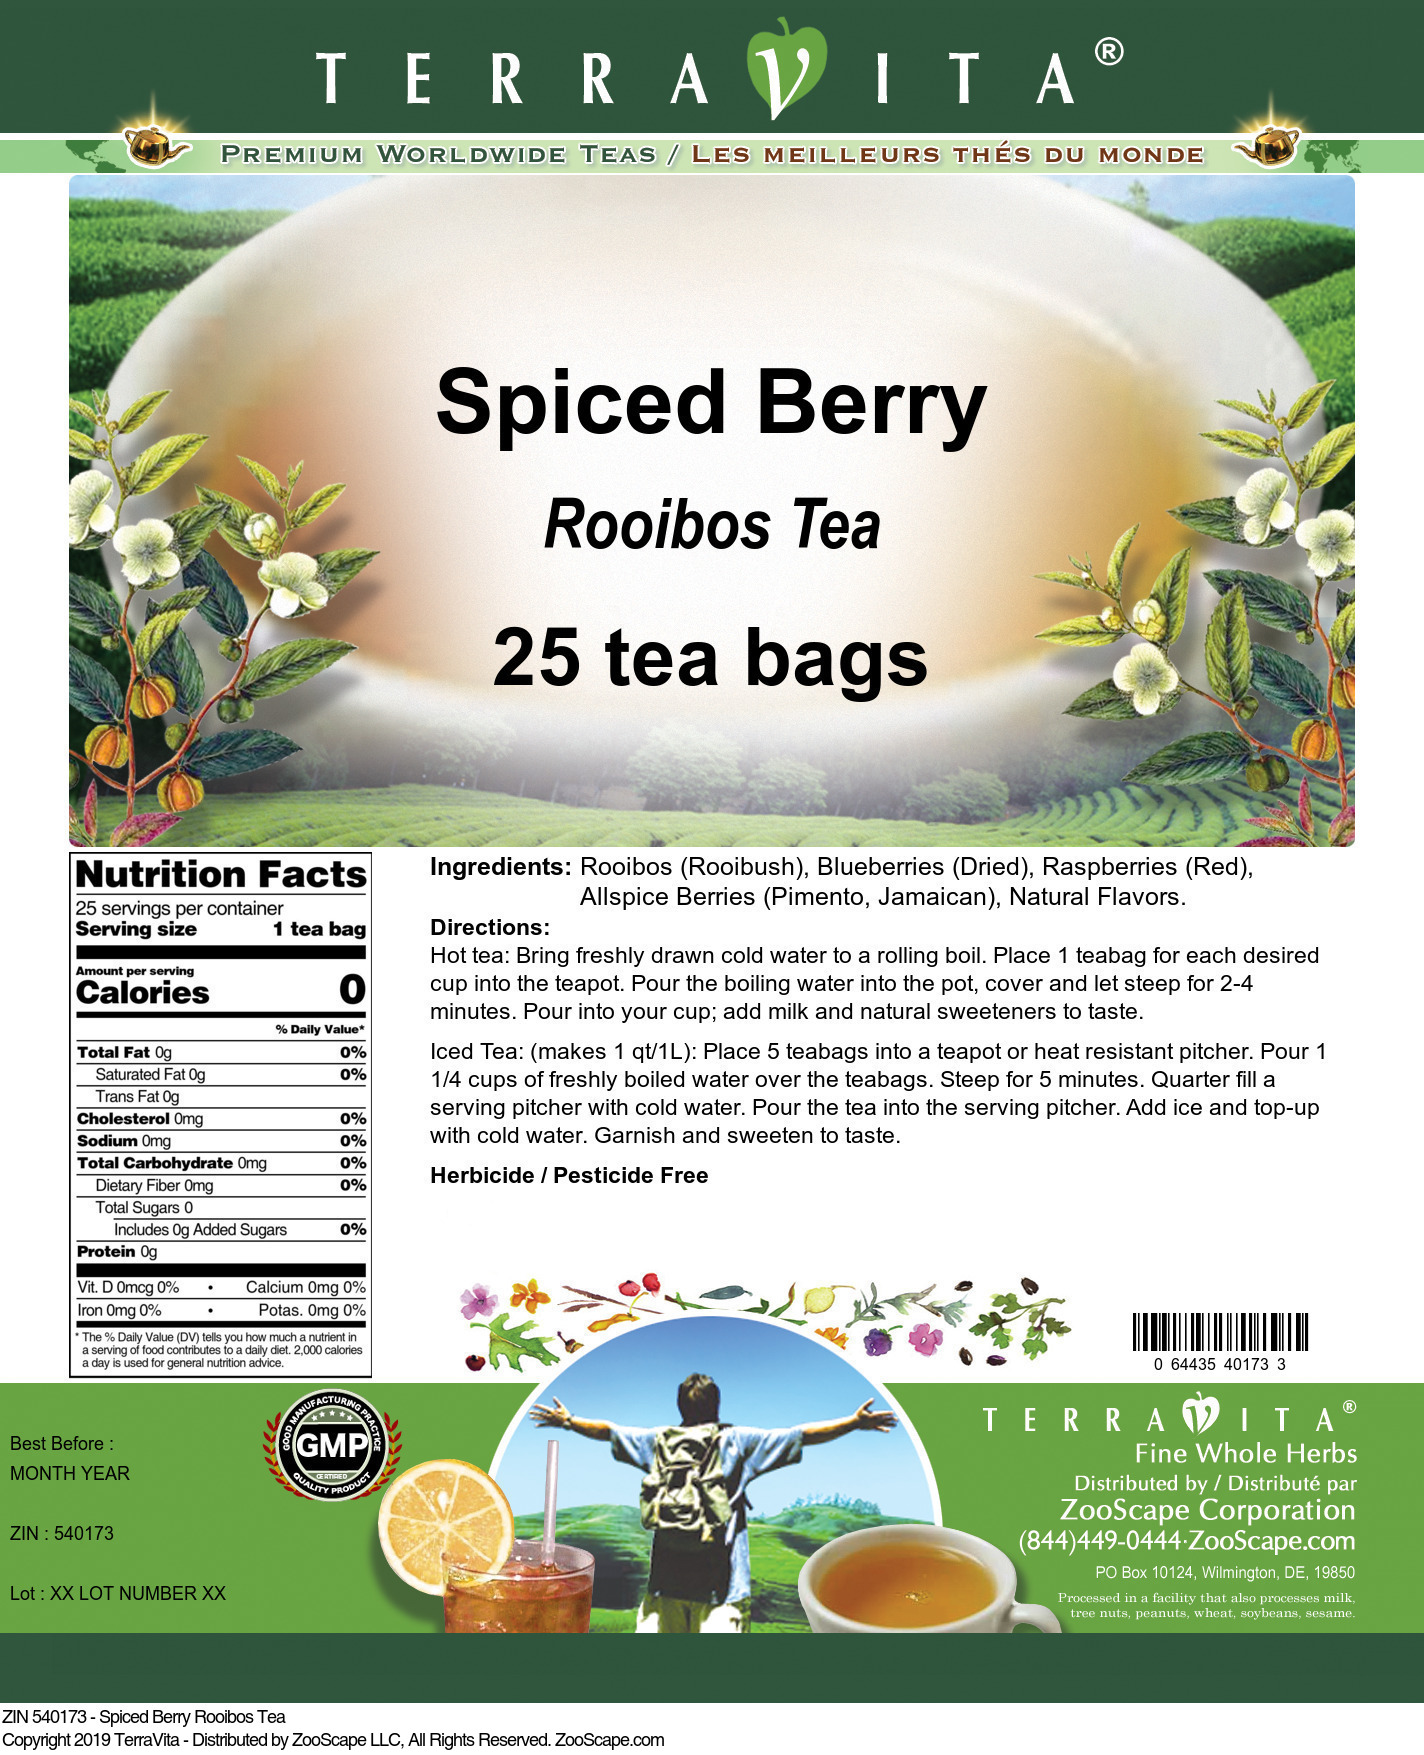 Spiced Berry Rooibos Tea - Label